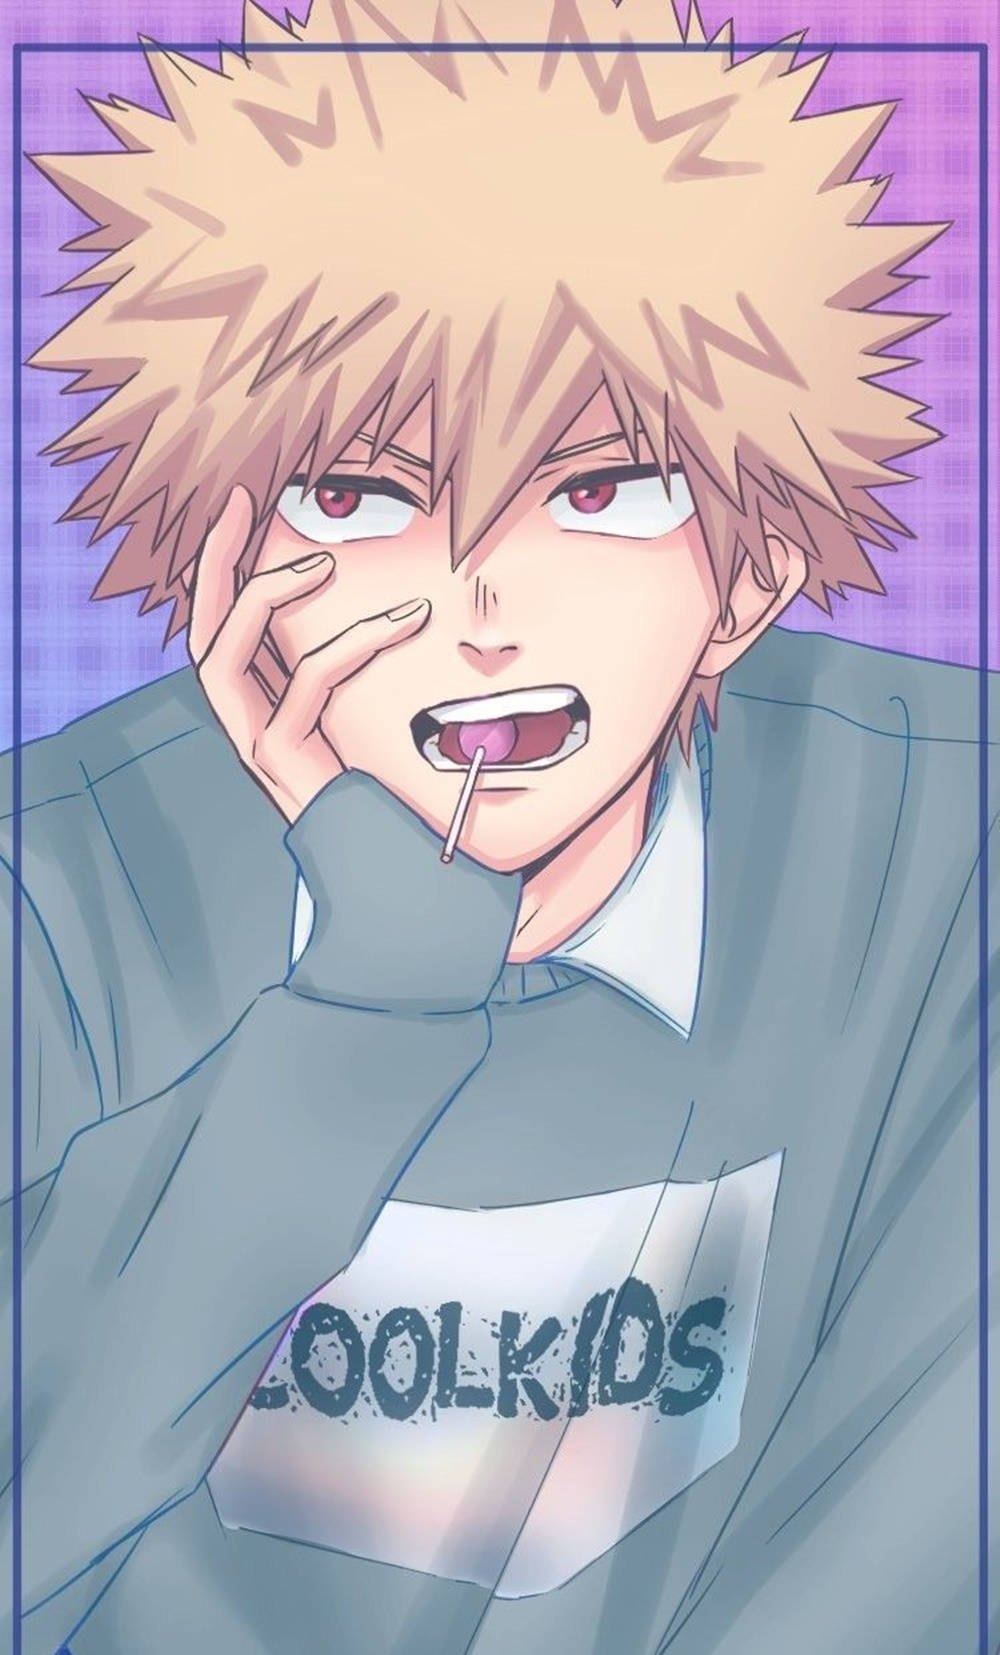 Cute Bakugou Looking On With A Determined Expression